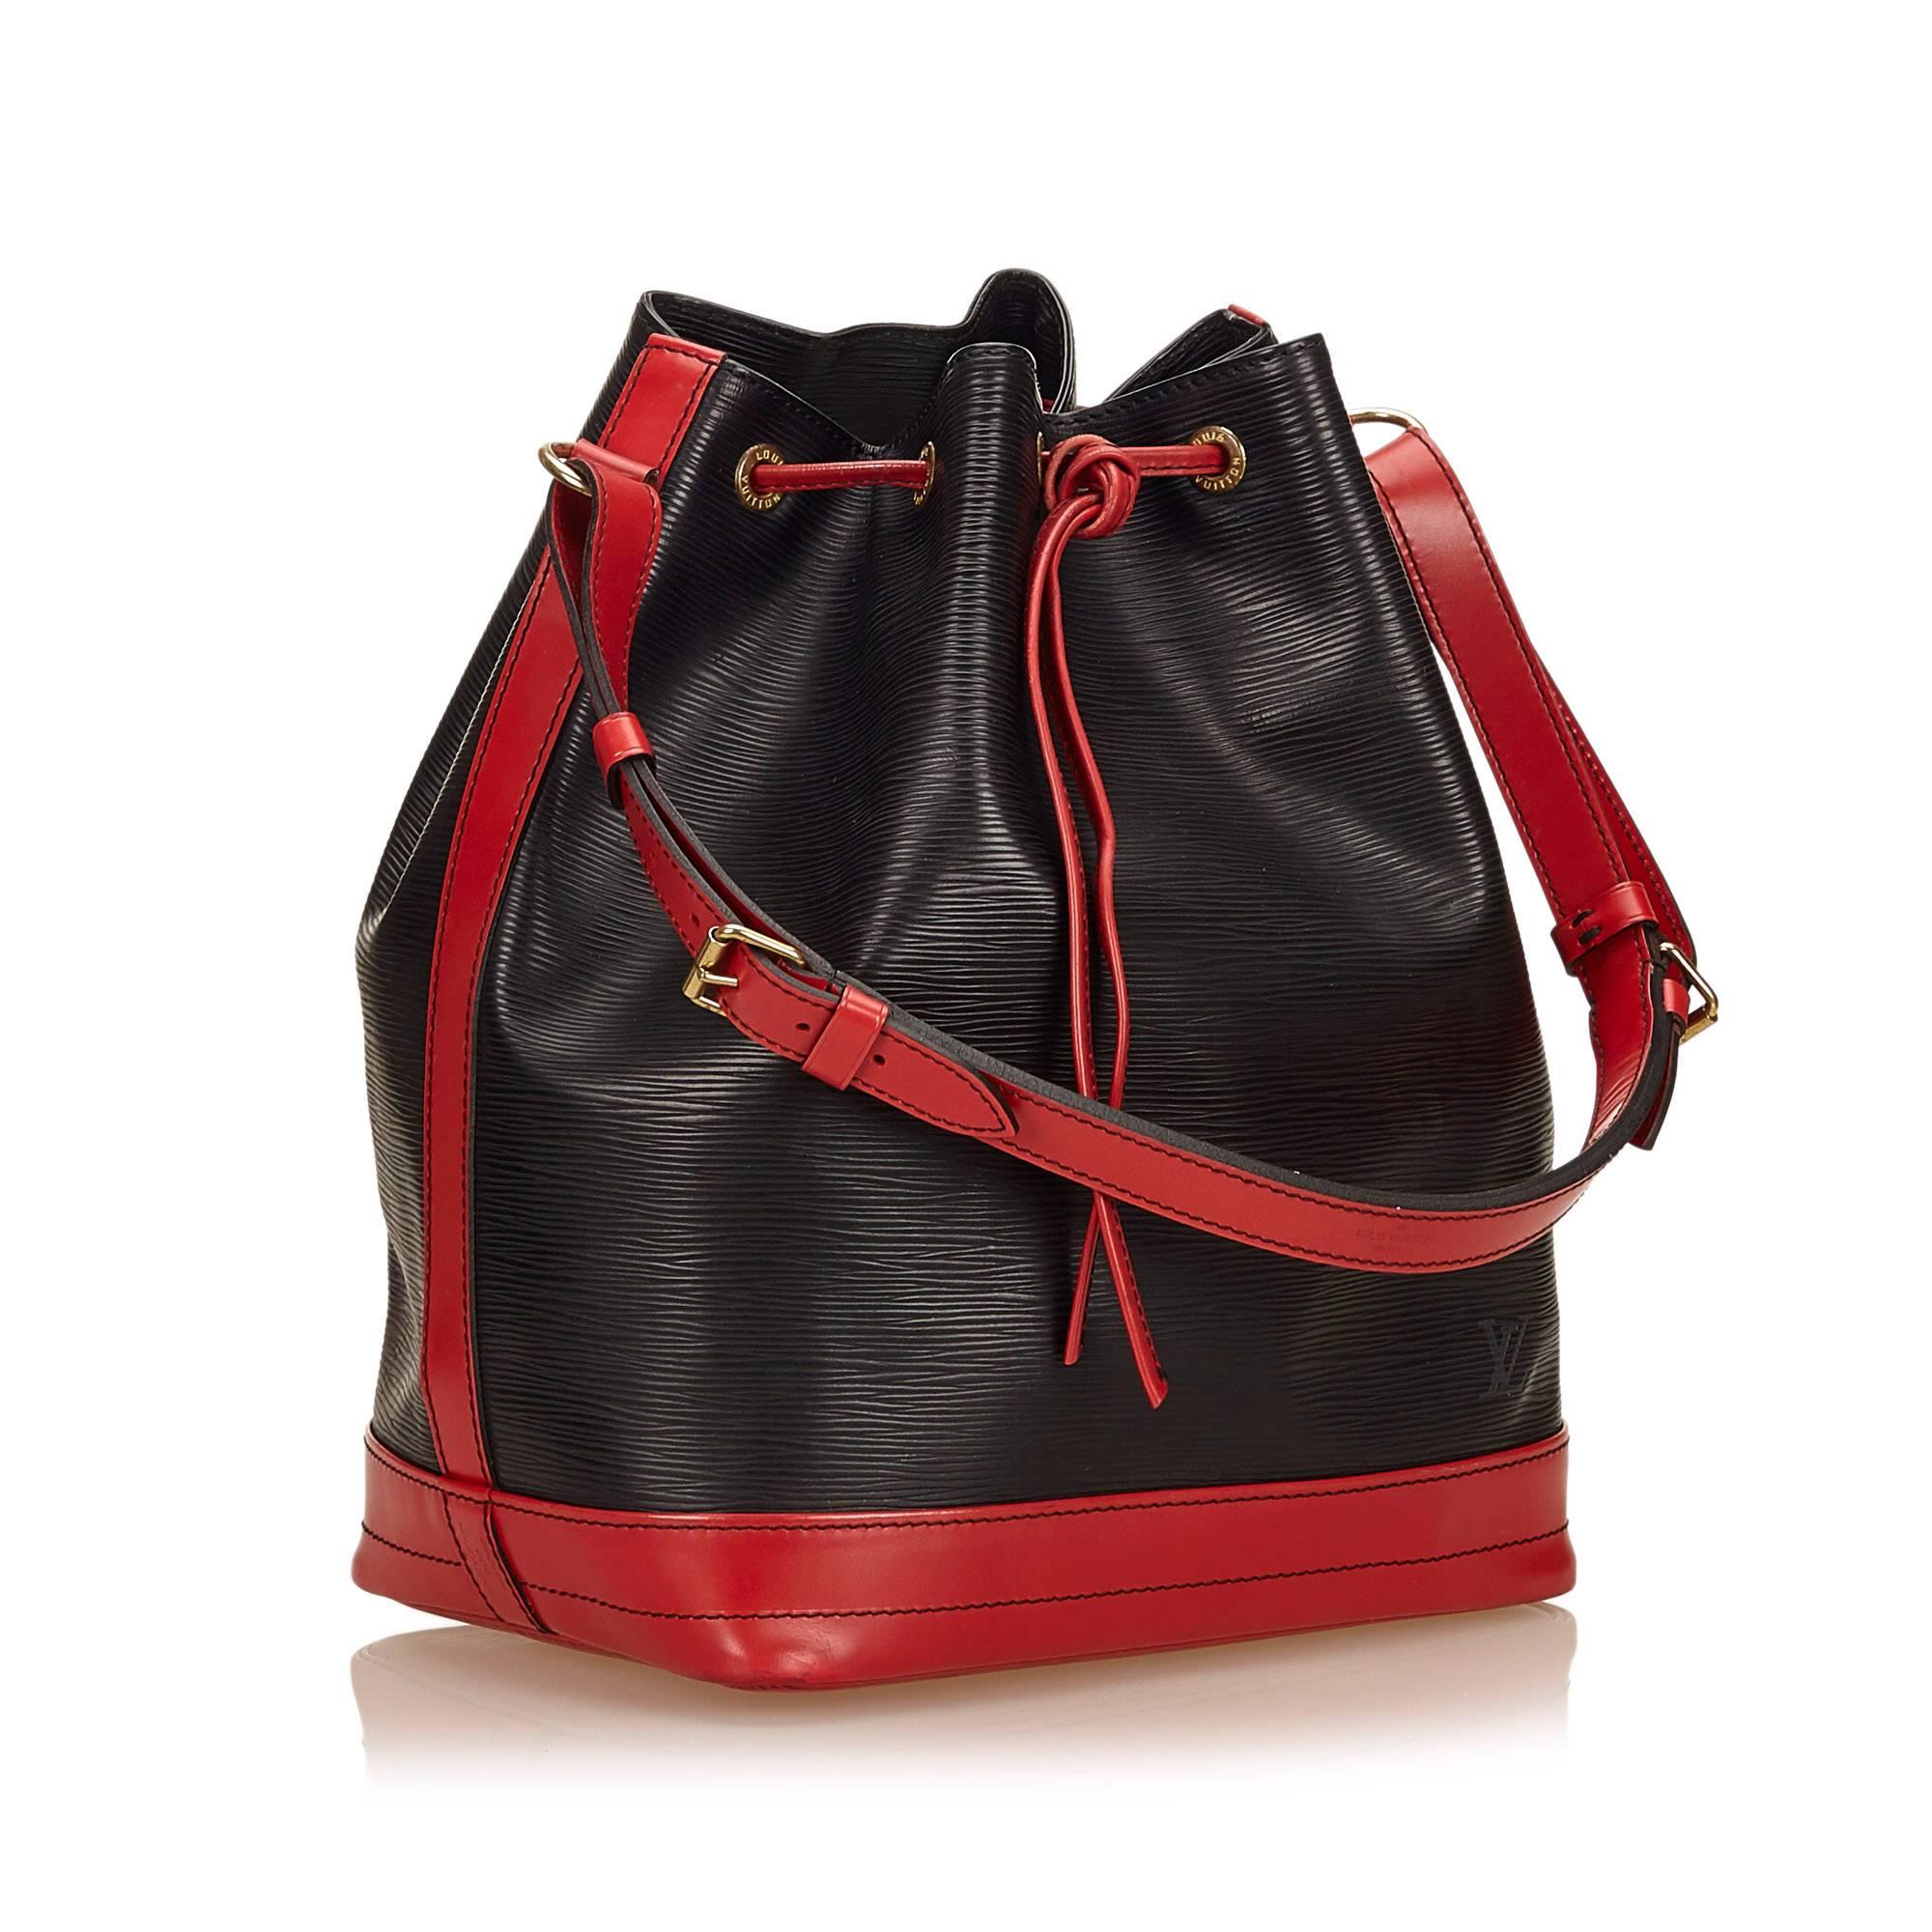 The Noe features a bicolor epi leather body, an adjustable shoulder strap, and a top drawstring closure.

Color: Black and Red 